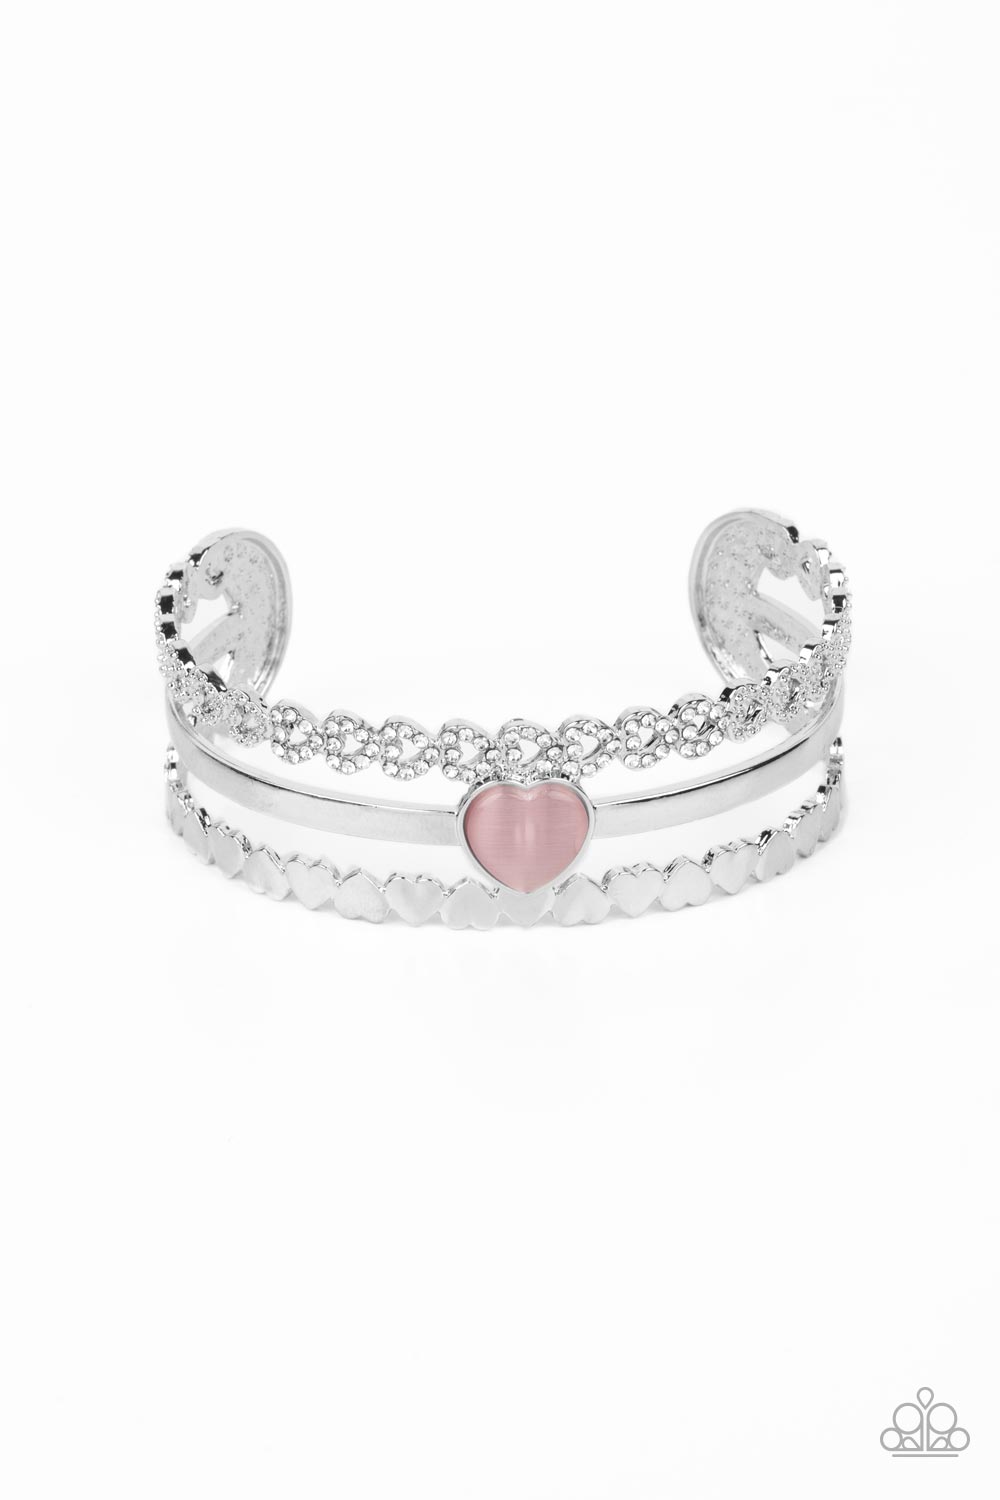 You Win My Heart - Pink and Silver Heart Bracelet - Paparazzi Accessories - Three bands of silver arc across the wrist to create a romantic-inspired cuff. A row of white rhinestone-studded hearts are turned on their sides, gracing the top band of the cuff while solid silver hearts alternate end-over-end to create the bottom band. A sleek bar of silver topped with a light pink, heart-shaped, cat's eye stone falls between the outer bands, emerging as a polished focal point in a whimsical finish.